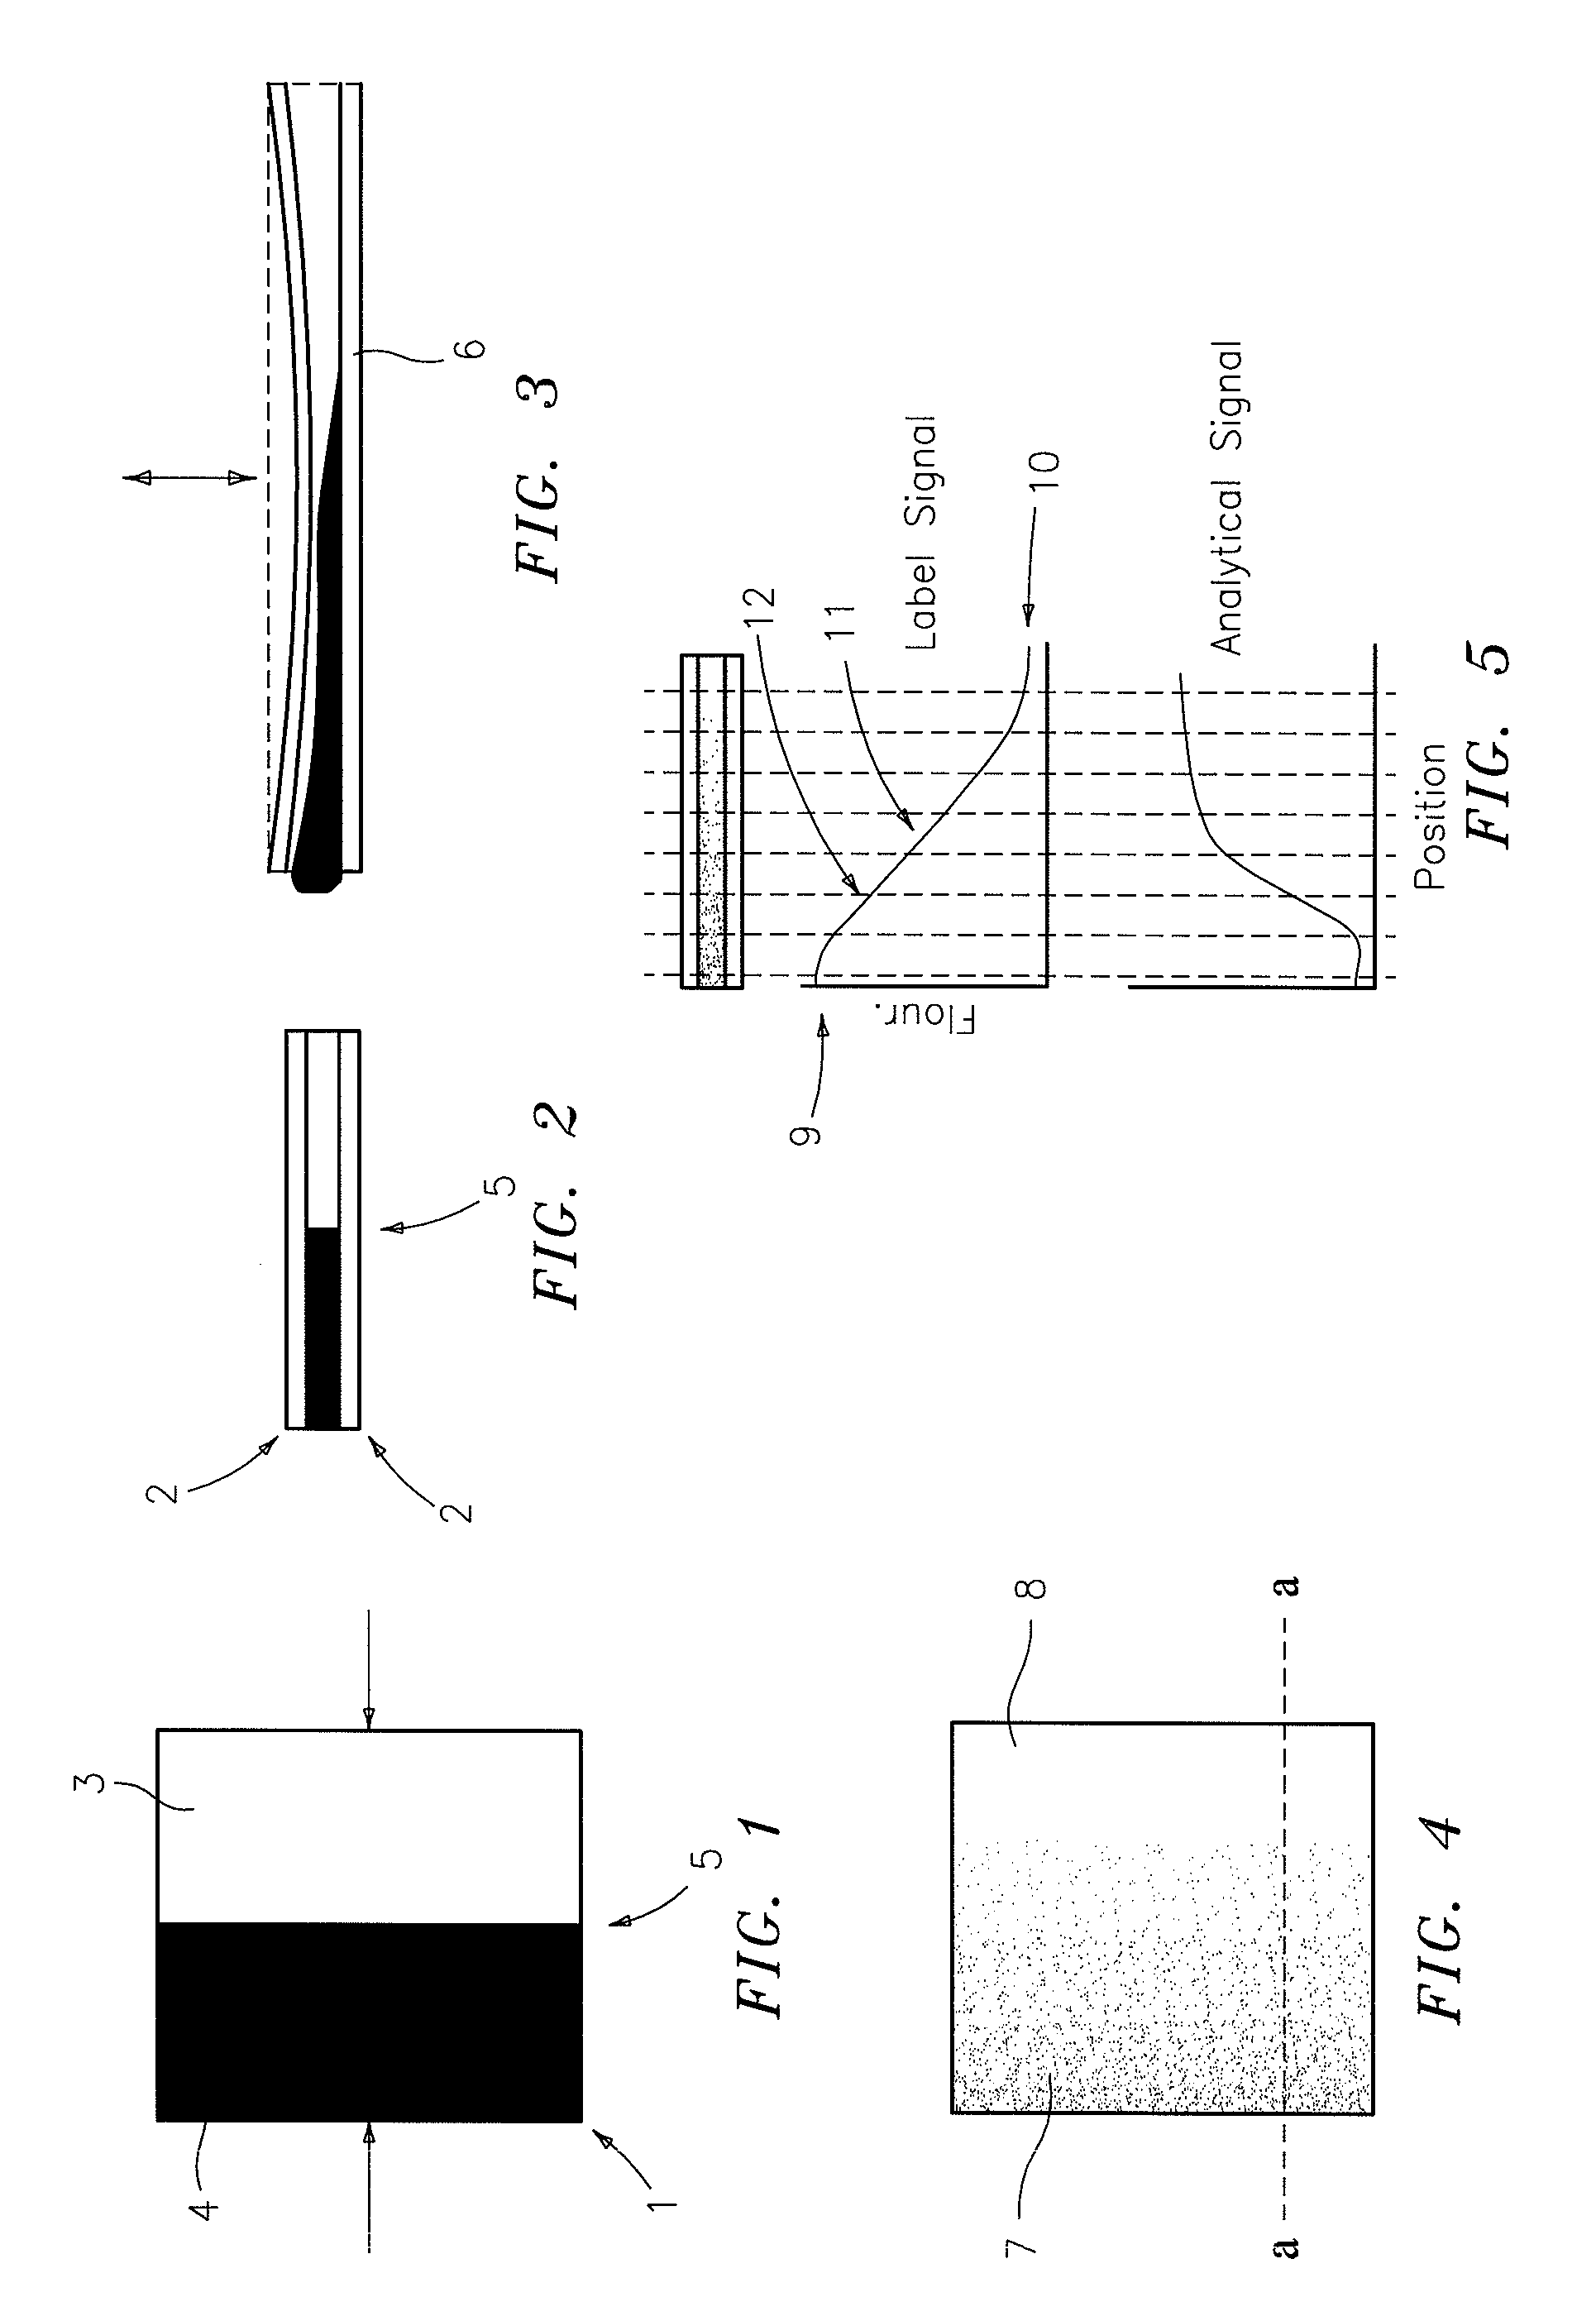 Method for serologic agglutination and other immunoassays performed in a thin film fluid sample